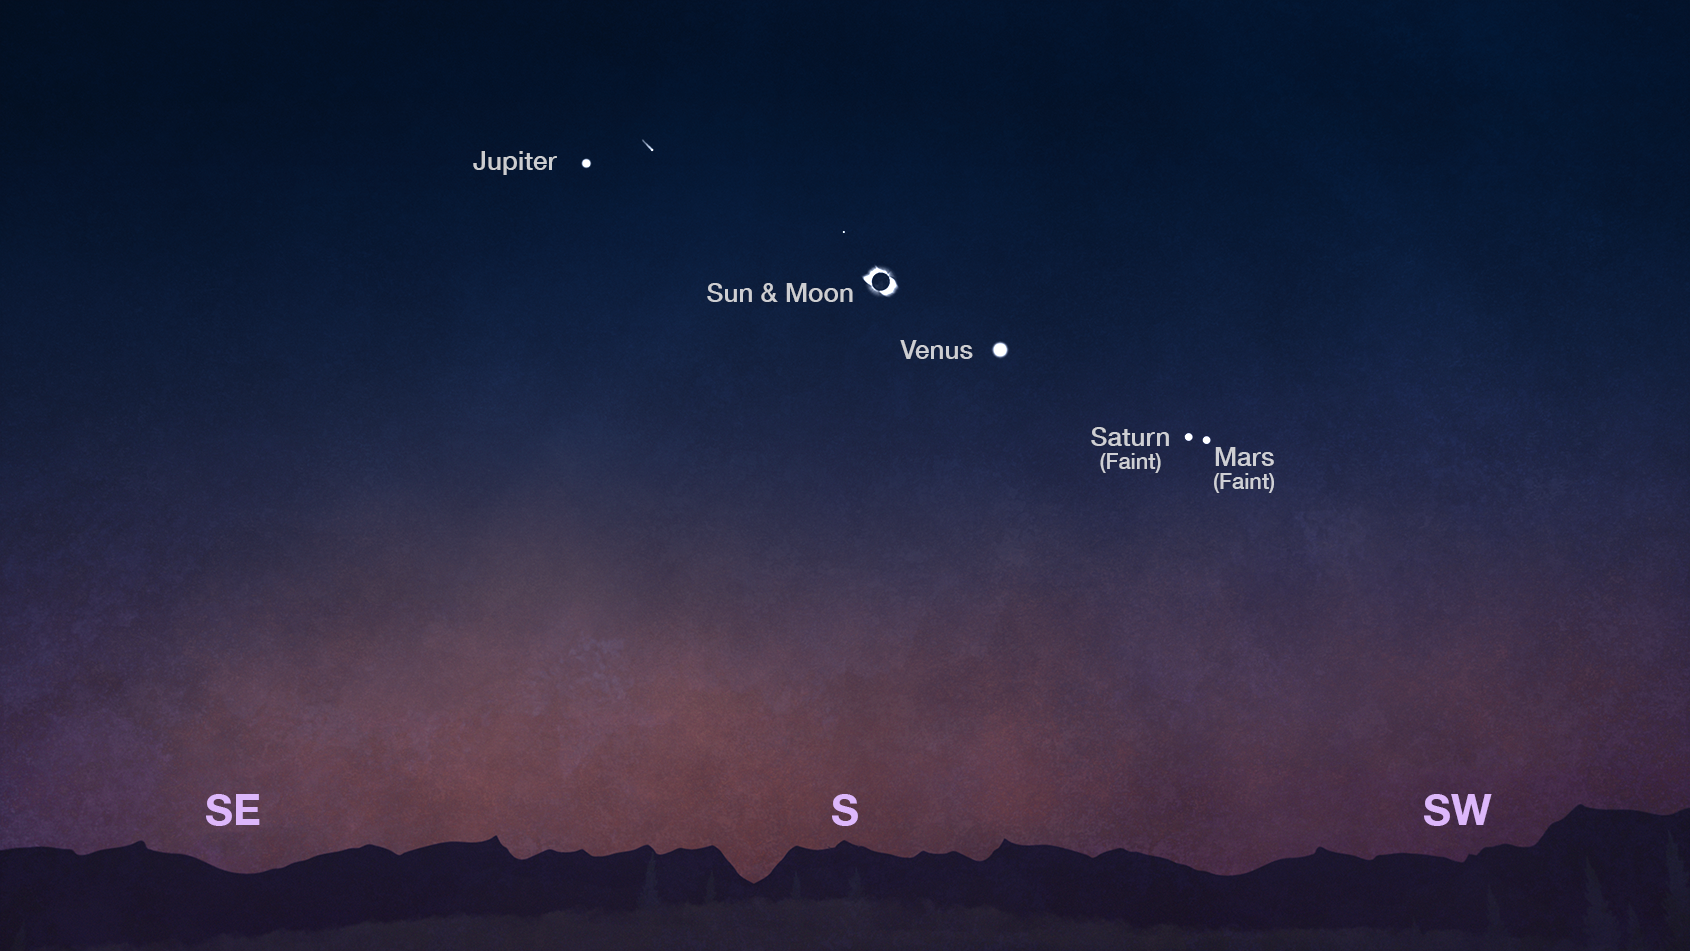 Jupiter, Venus, Saturn, and Mars could be visible to the unaided eye during totality on April 8, 2024. Mercury (to the upper left of the eclipsed Sun) and Comet 12P/Pons-Brooks (to the right of Jupiter), not labeled here, will likely be too faint to see without binoculars or a telescope.Credit: NASA/JPL-Caltech